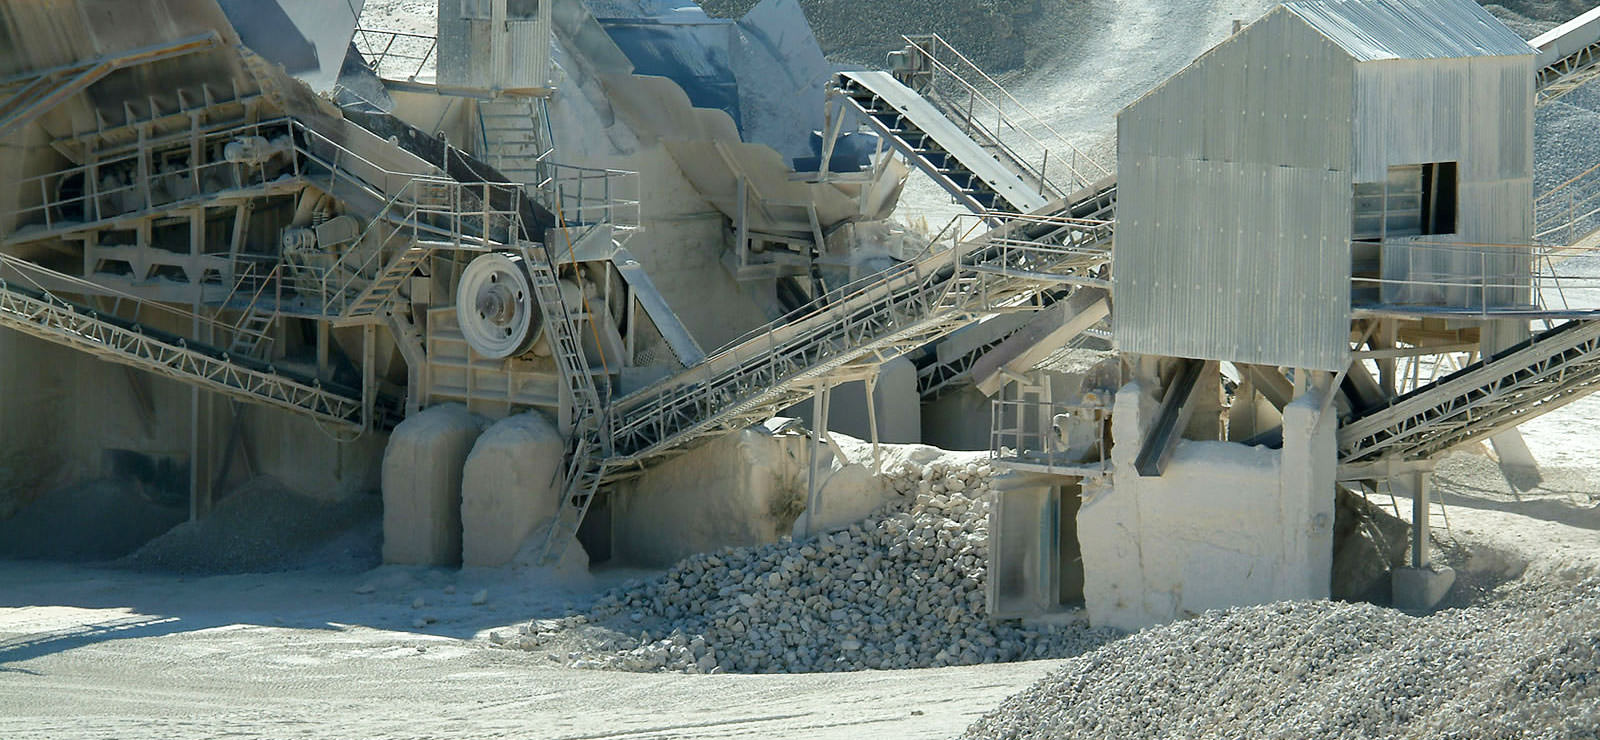 Cement sector expected to rebound by 2021, thanks to tax cut and